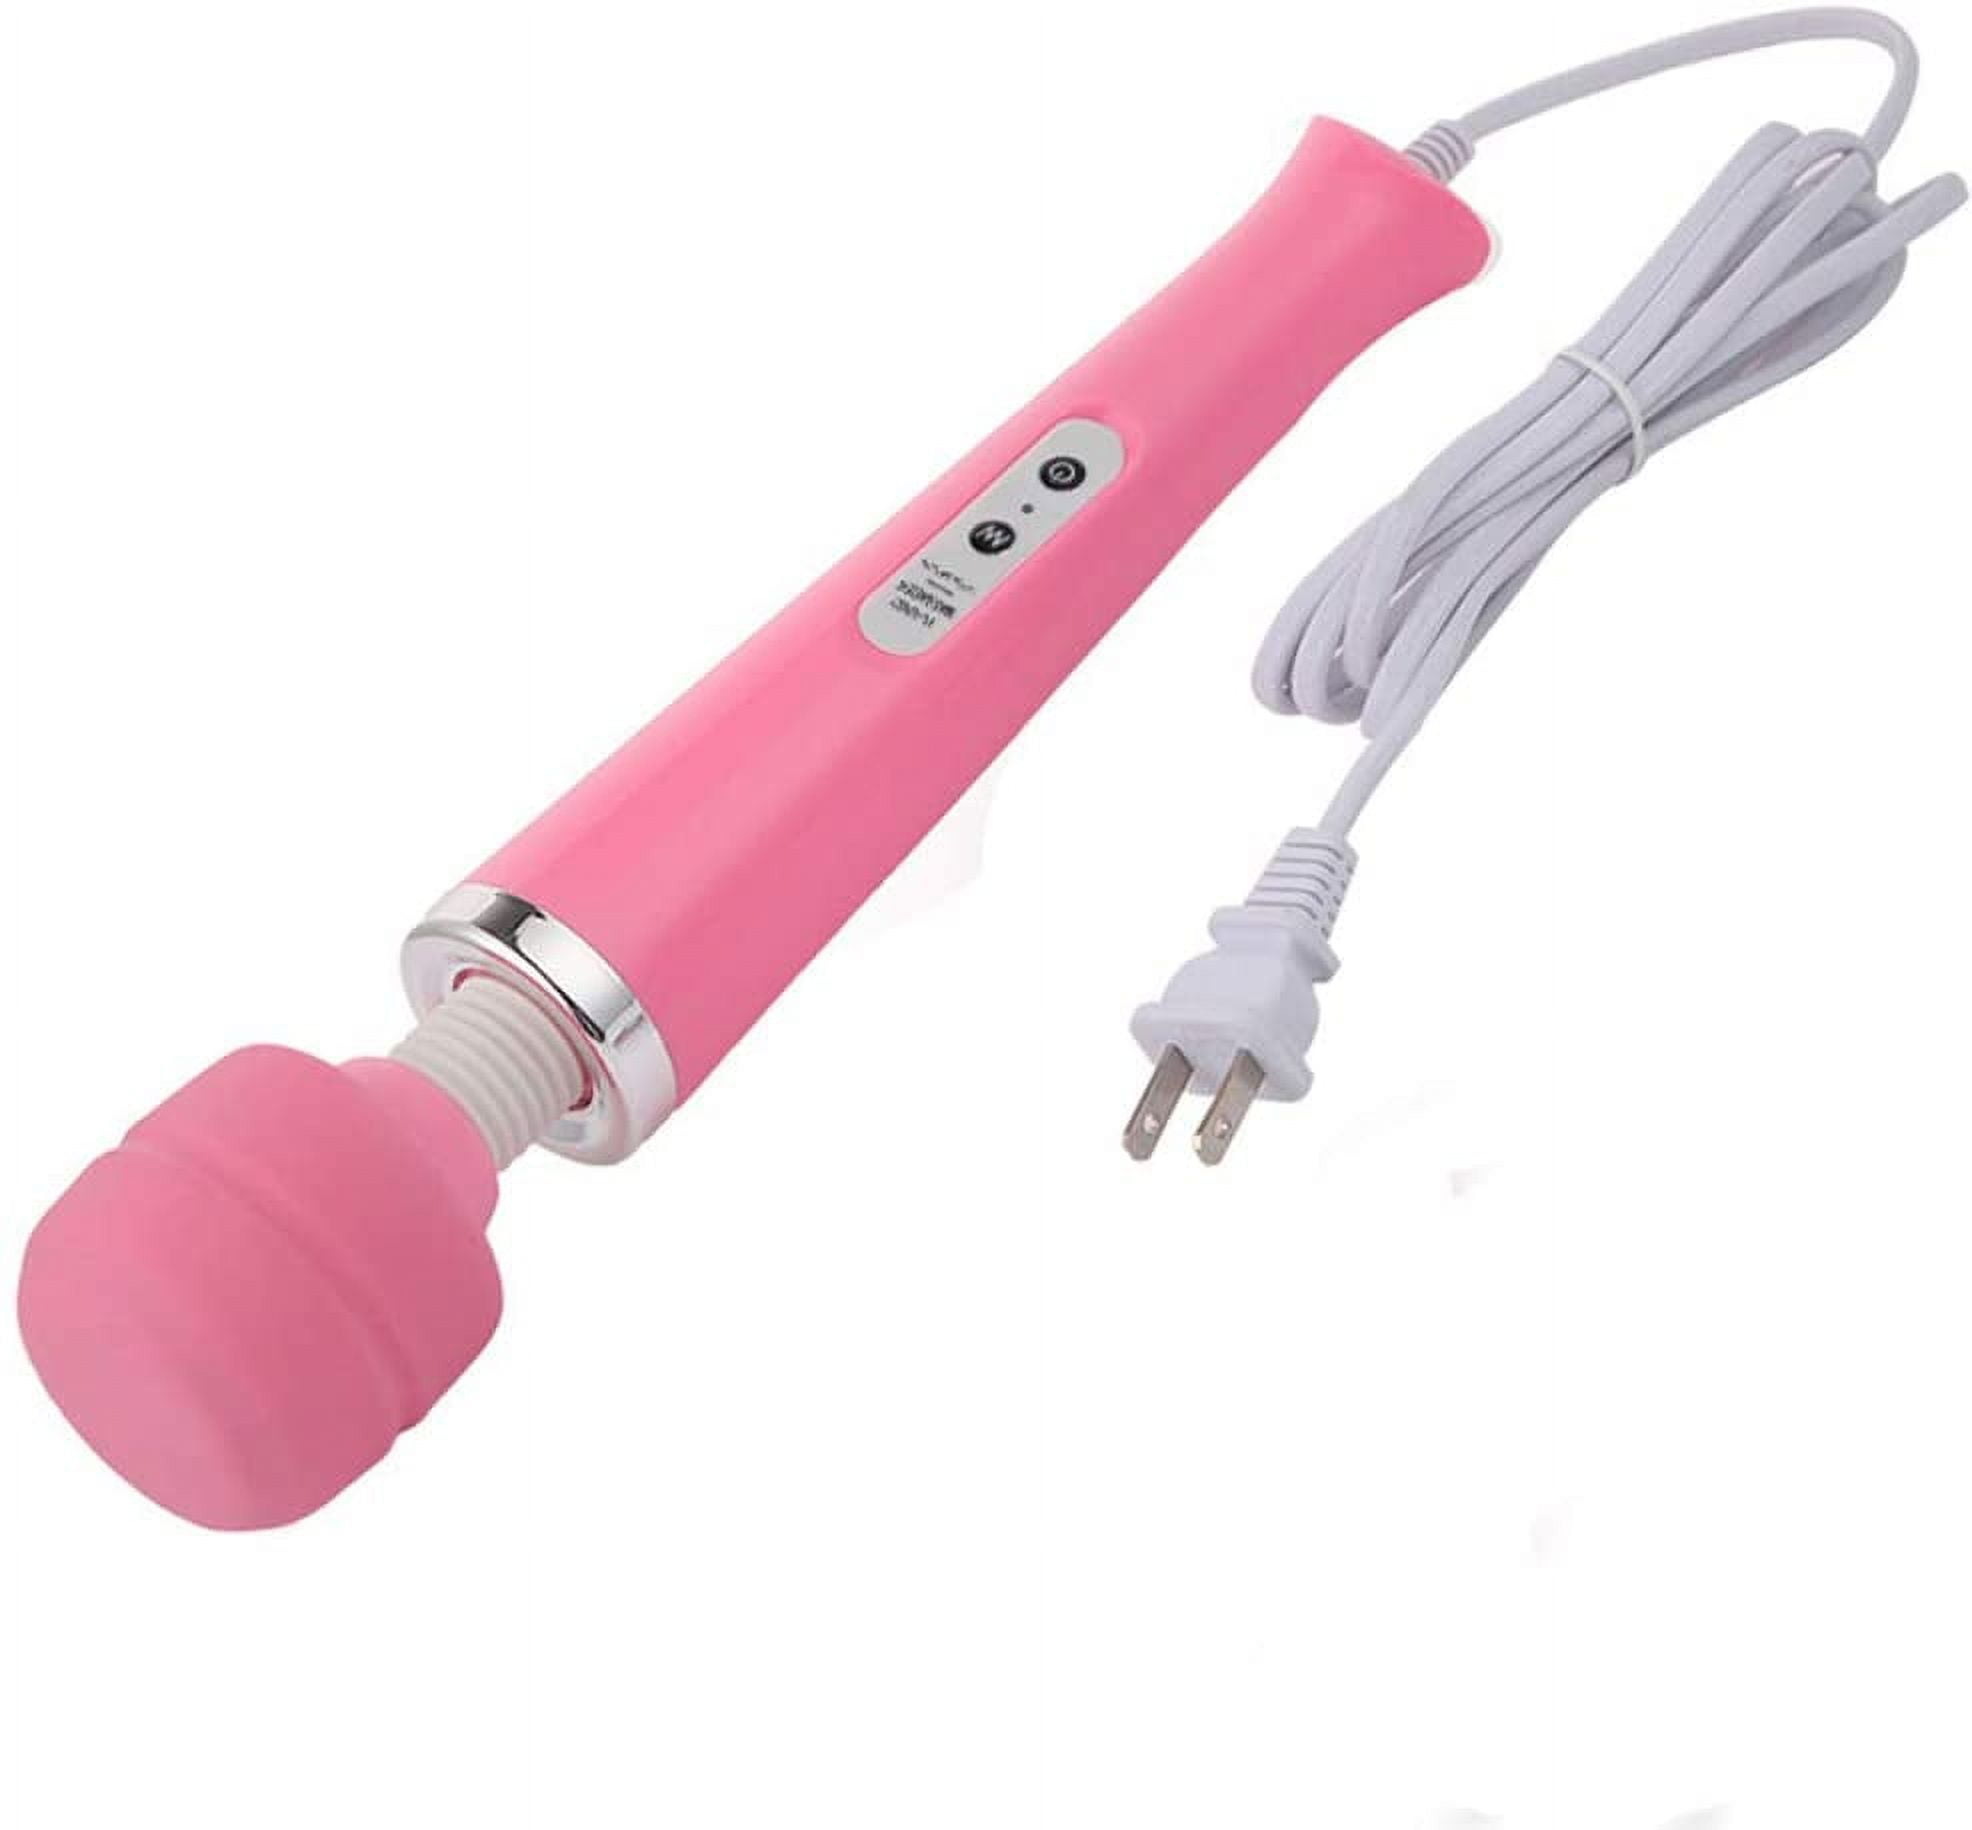 Handheld Personal Wand Massager With 10 Powerful Magic Vibration Neck Shoulder Back Massage For